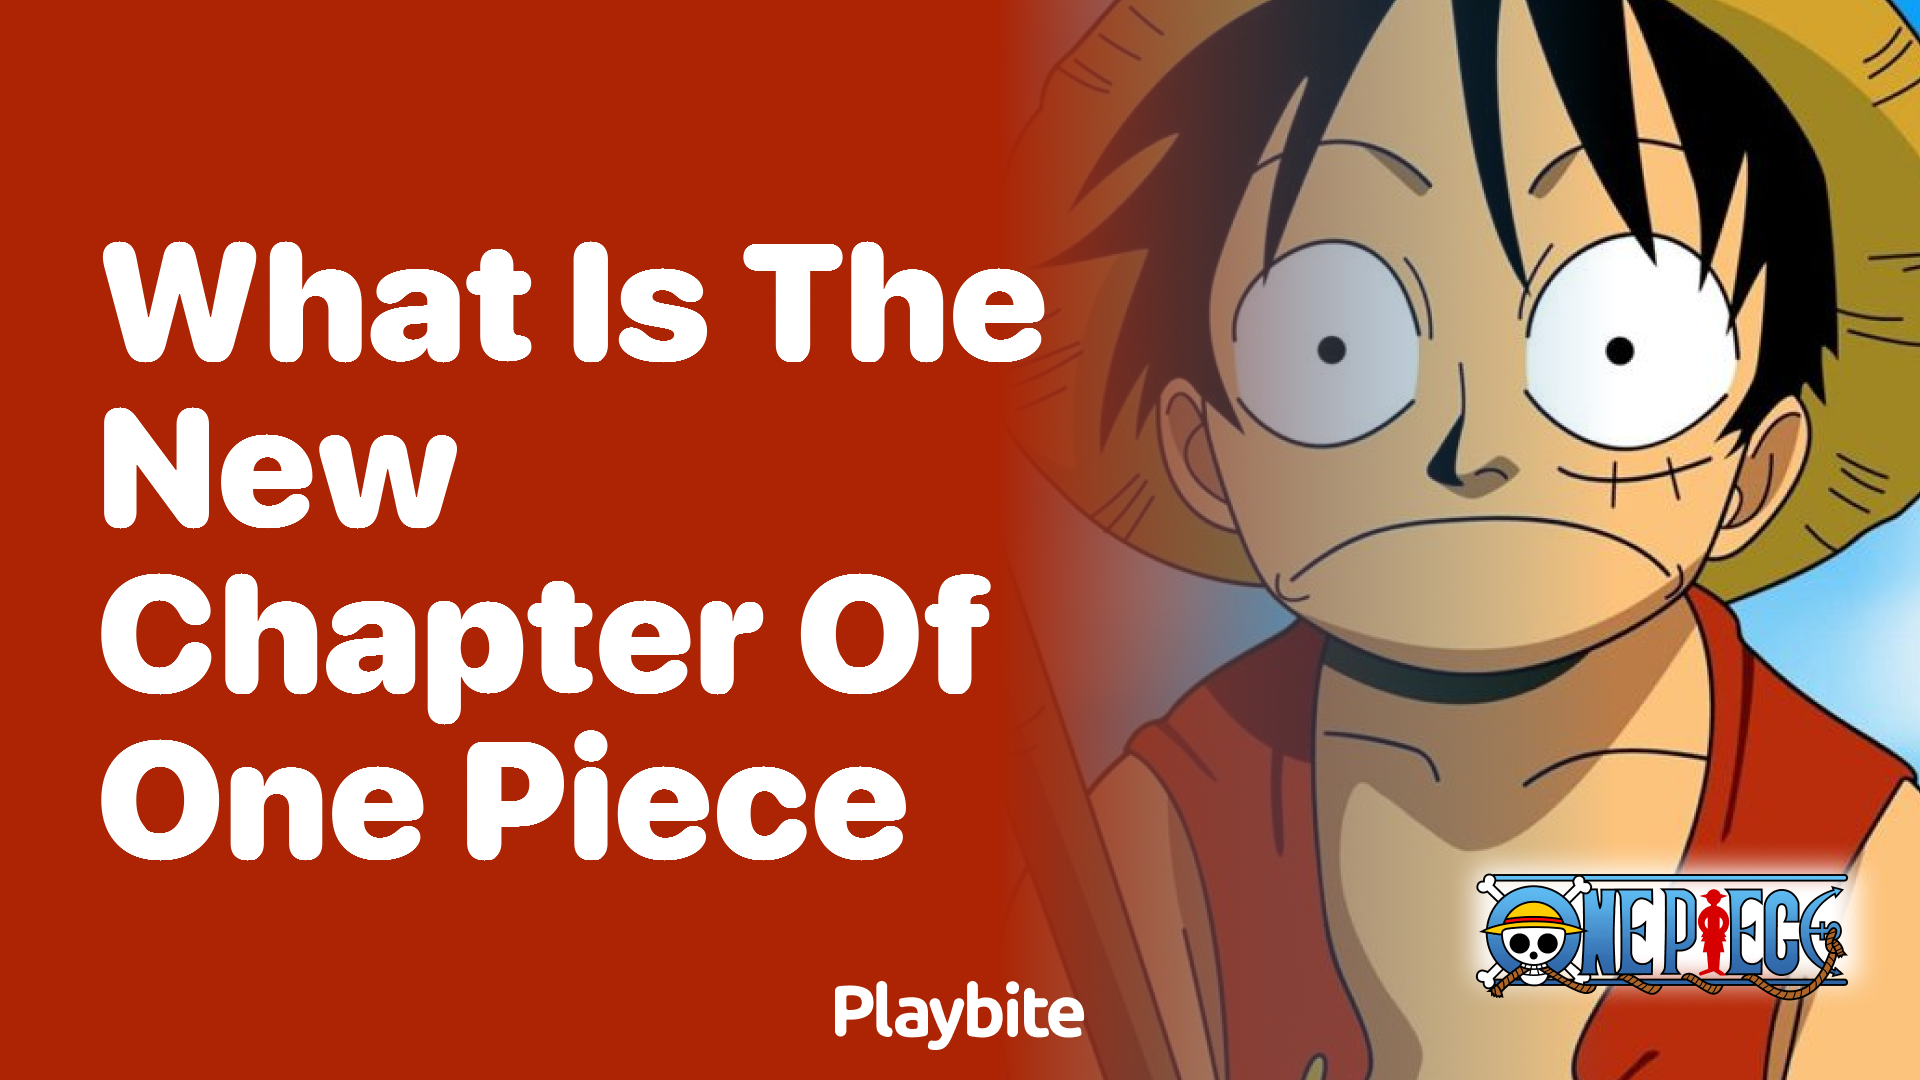 What is the new chapter of One Piece?